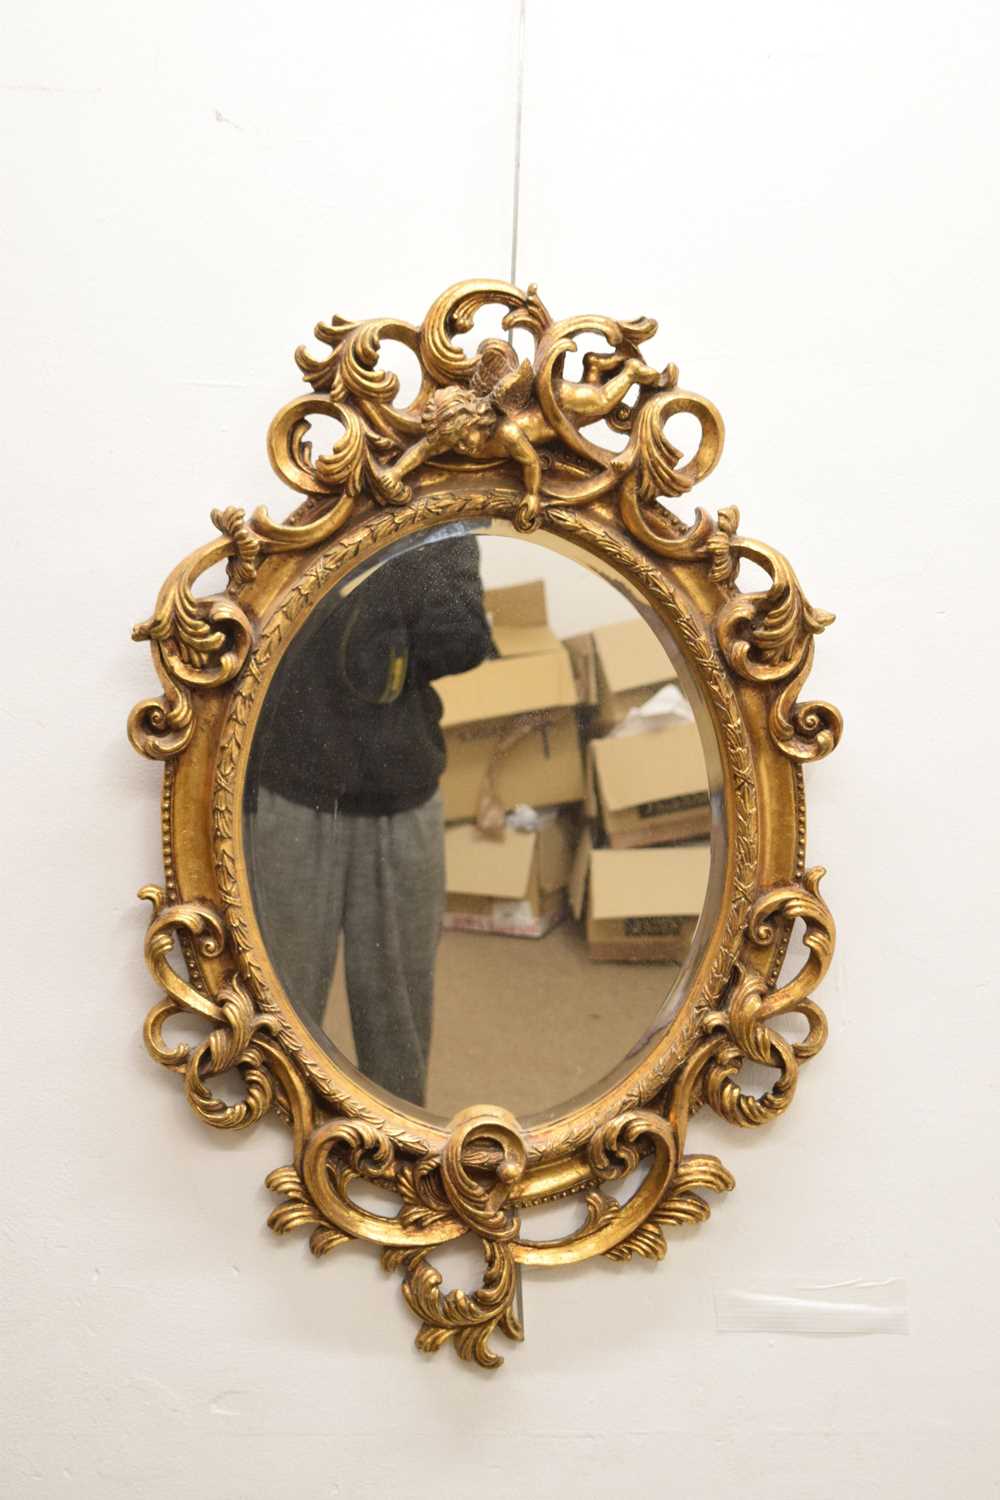 Reproduction giltwood oval wall mirror - Image 2 of 8